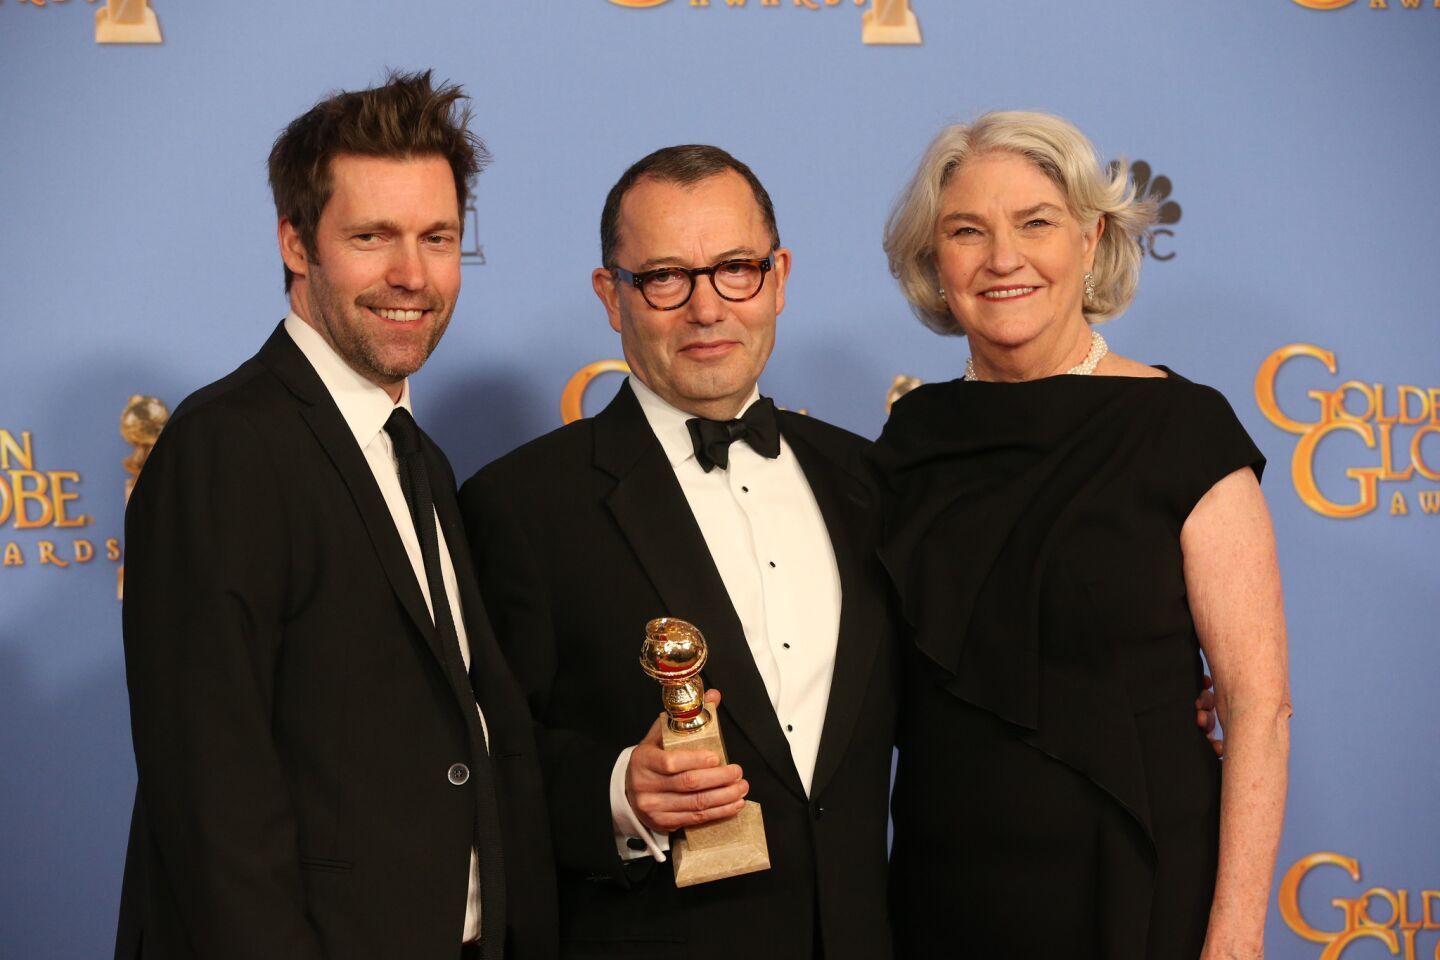 Producers Mark Pybus, left, Colin Callender and Rebecca Eaton, winners of Miniseries or Television Film for "Wolf Hall," pose in the press room at the 73rd Annual Golden Globe Awards show at the Beverly Hilton Hotel on Jan. 10, 2016.